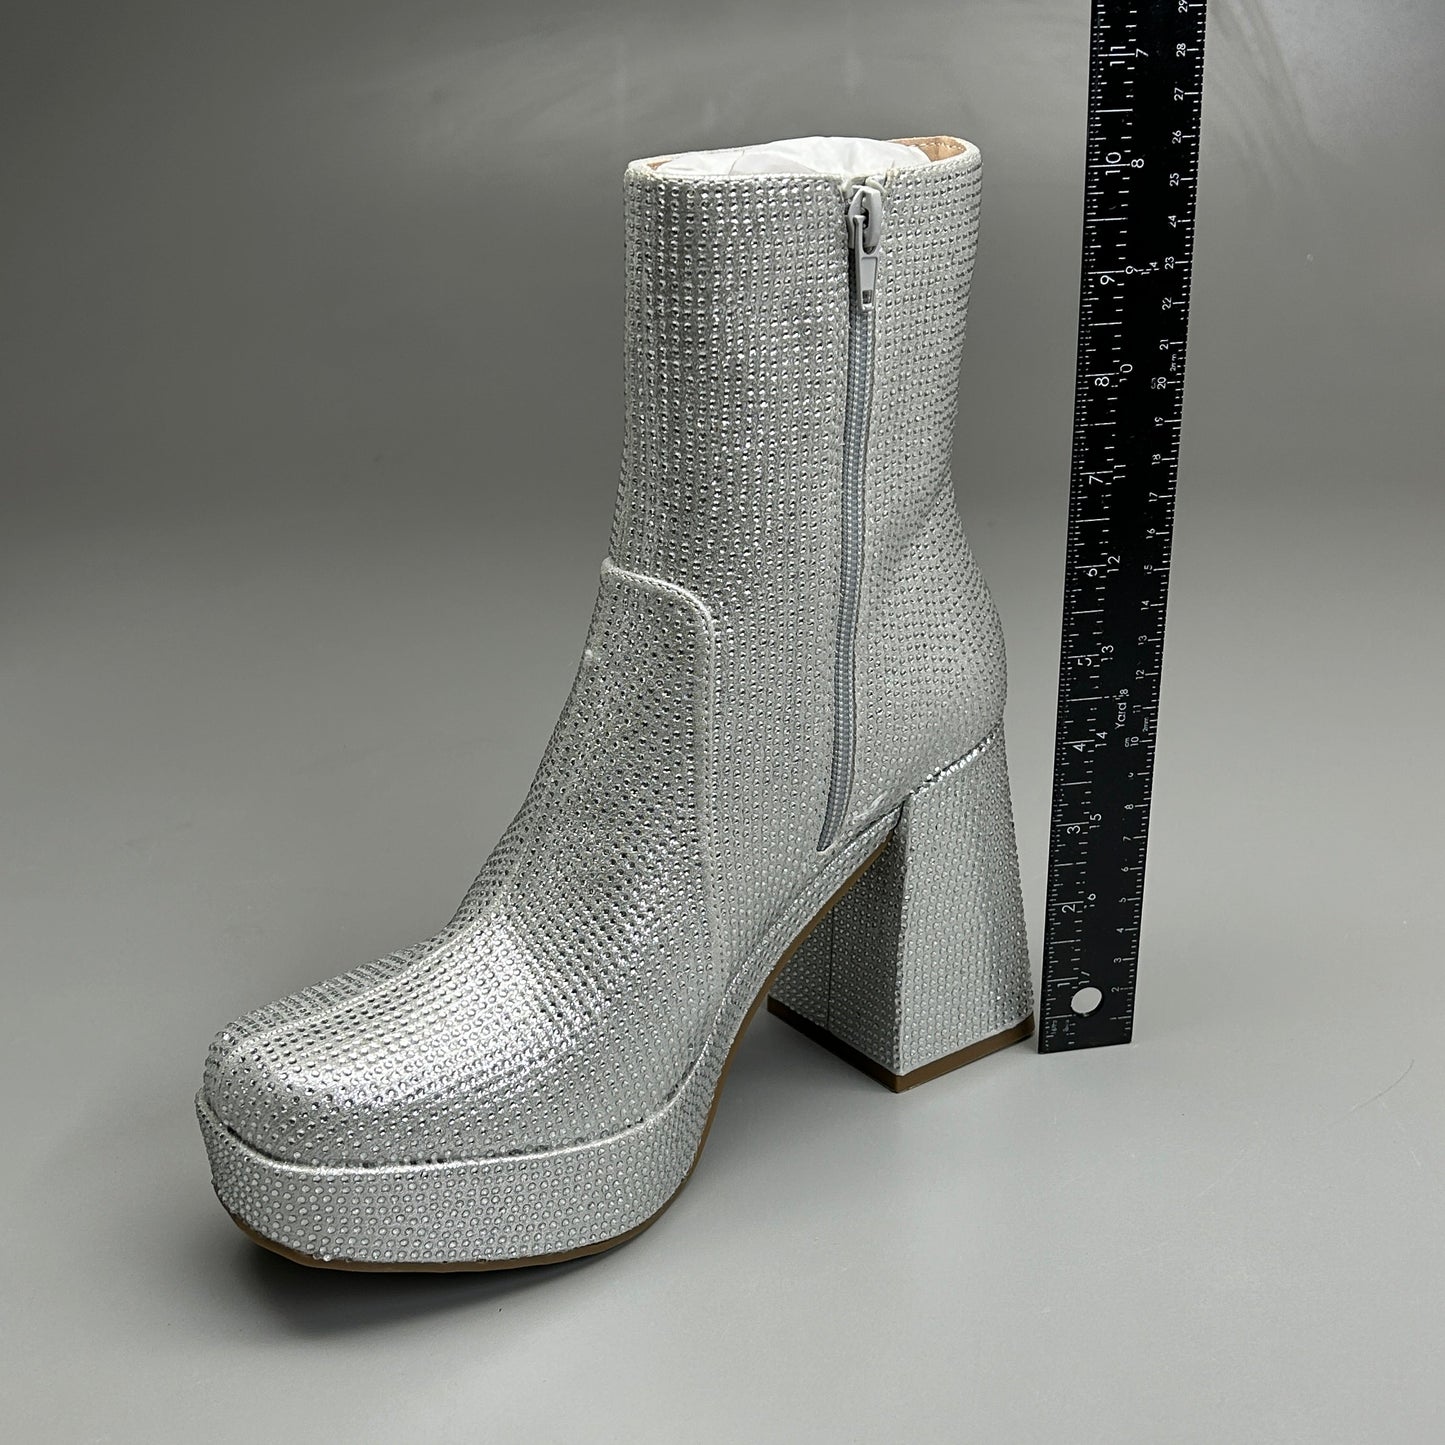 MIA Iva Silver Stone Heeled Boots Women's Sz 7.5 Silver GS1253108 (New)